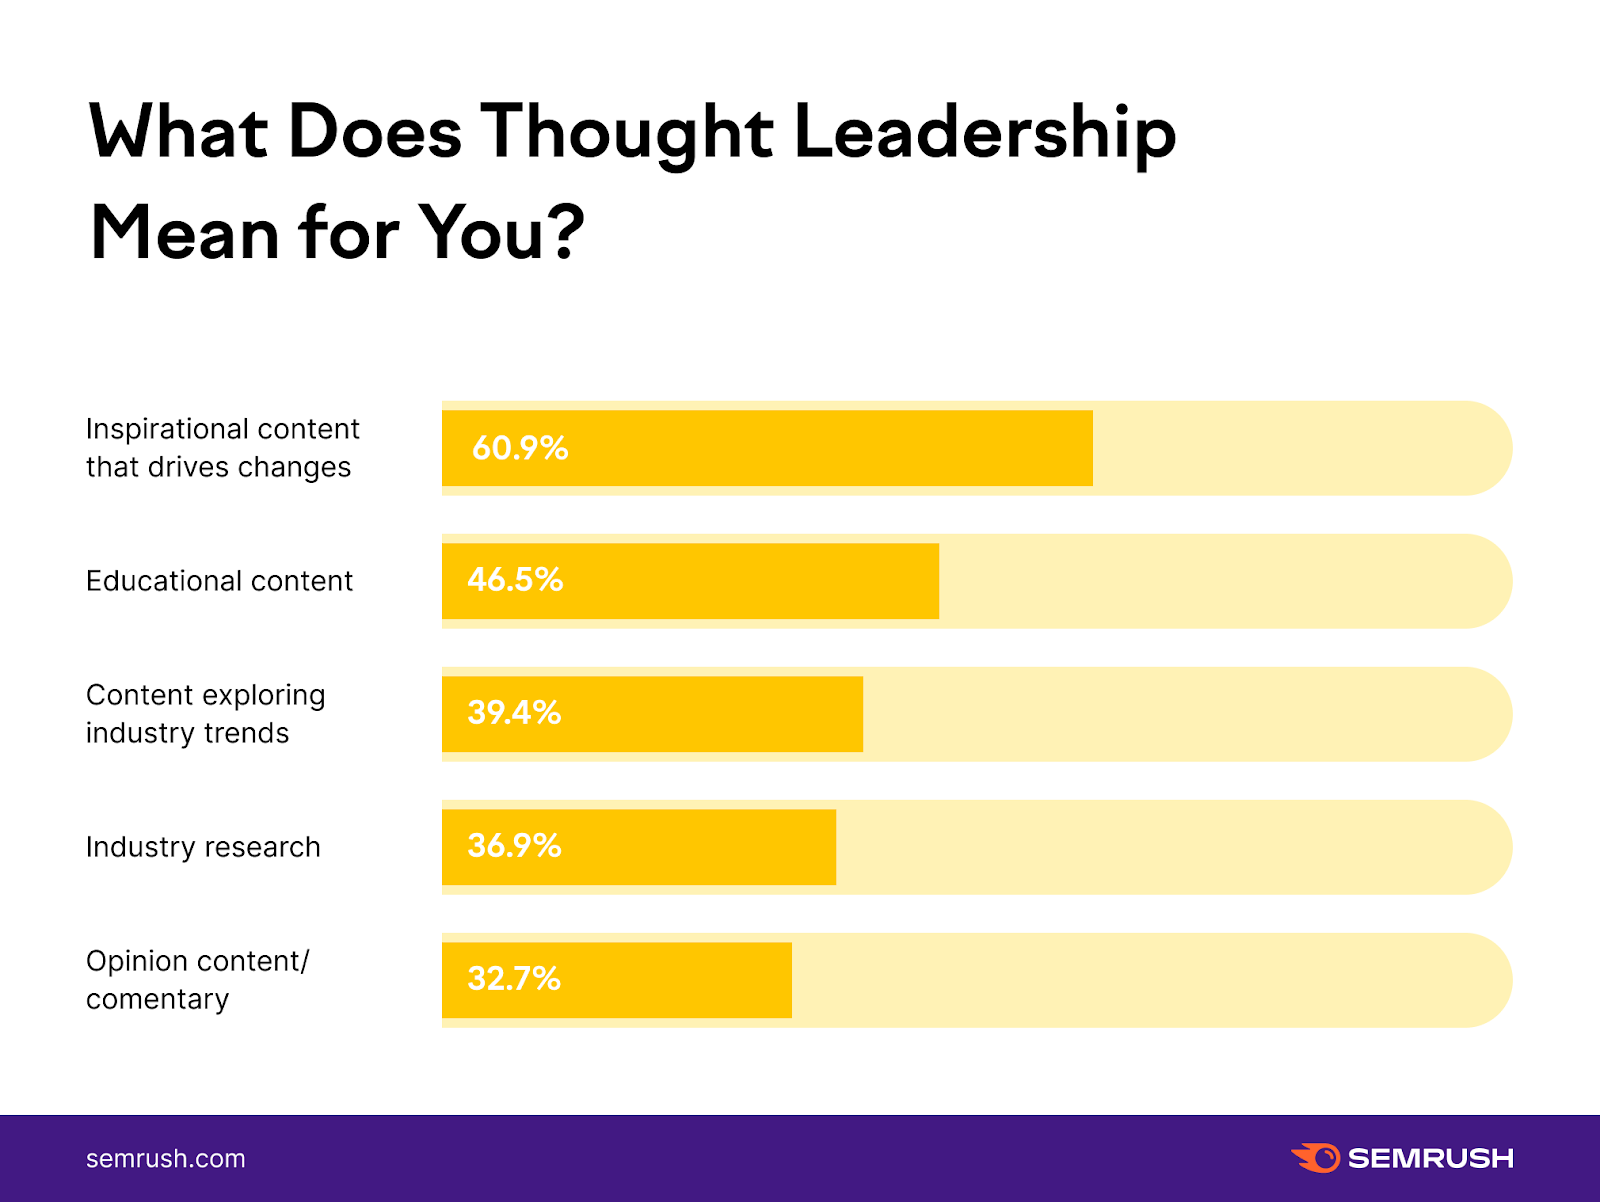 Thought Leadership from SEMRush